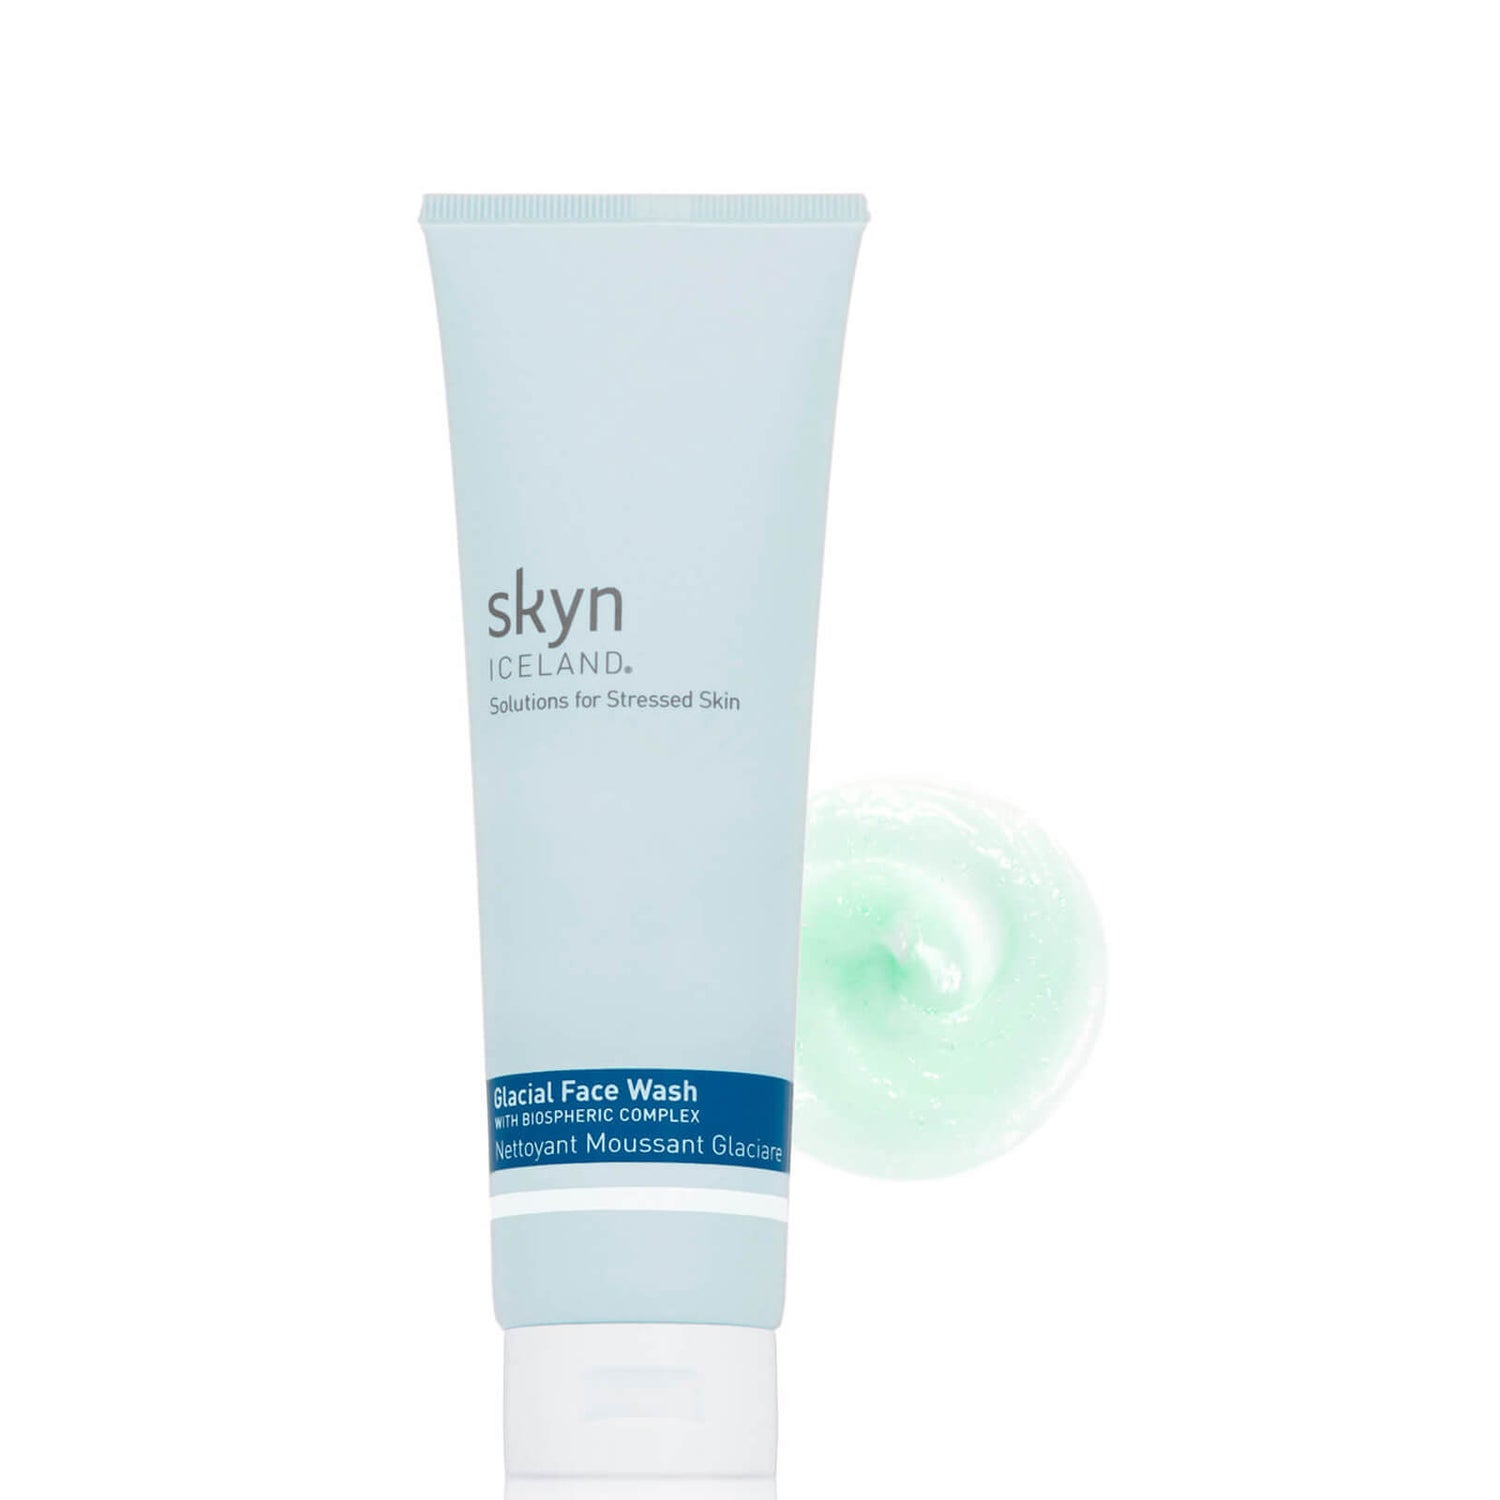 skyn ICELAND Glacial Face Wash With Biospheric Complex (5 oz.)